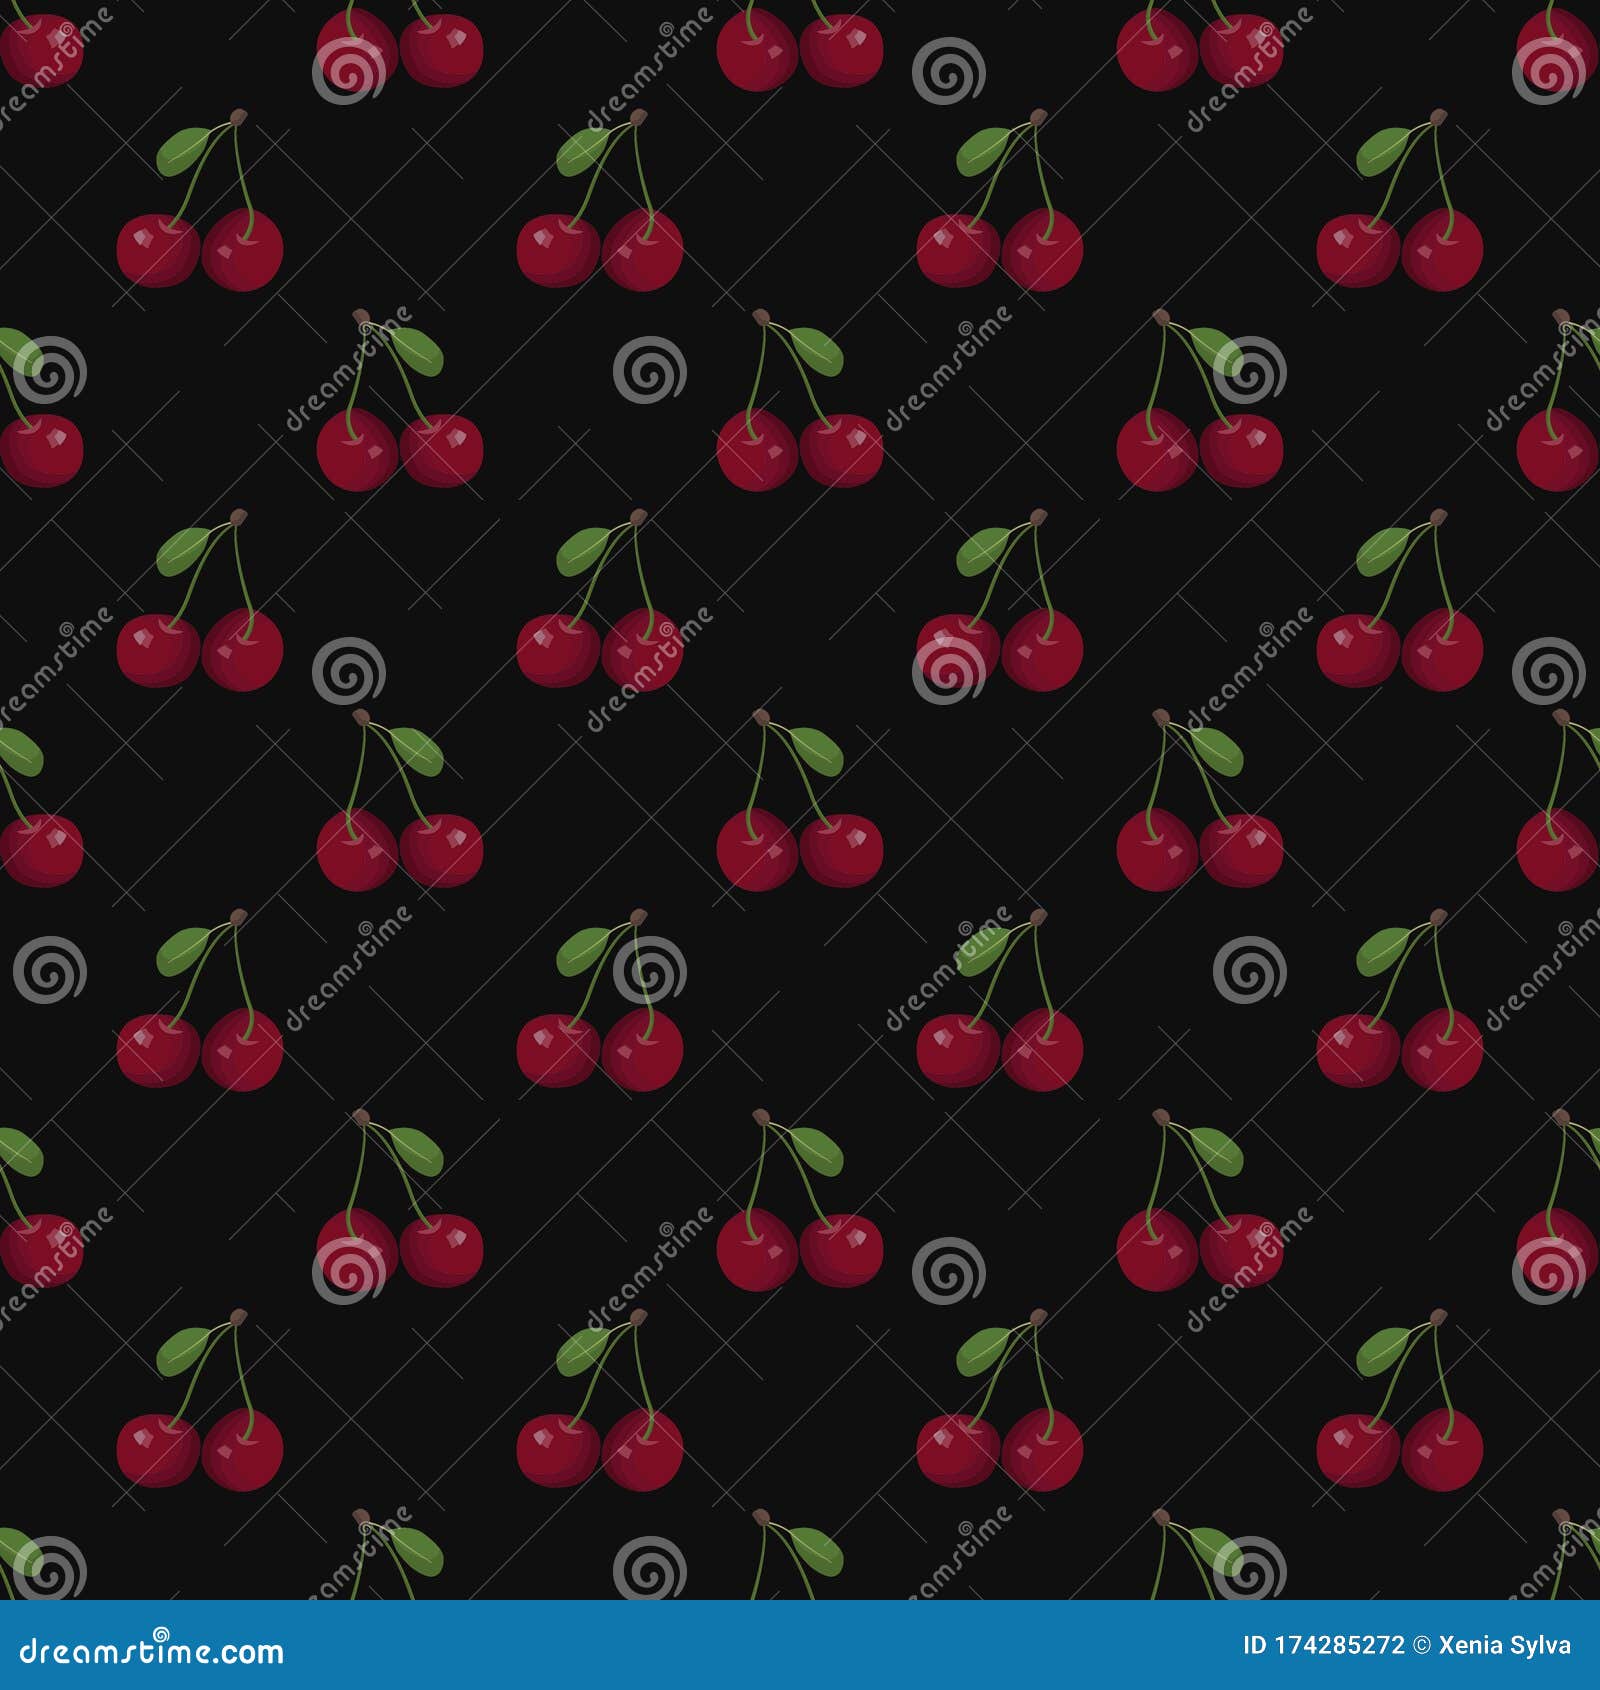 Cherry Seamless Pattern; Juicy Cherry with Leaves on Black Background.  Stock Vector - Illustration of fruit, berry: 174285272